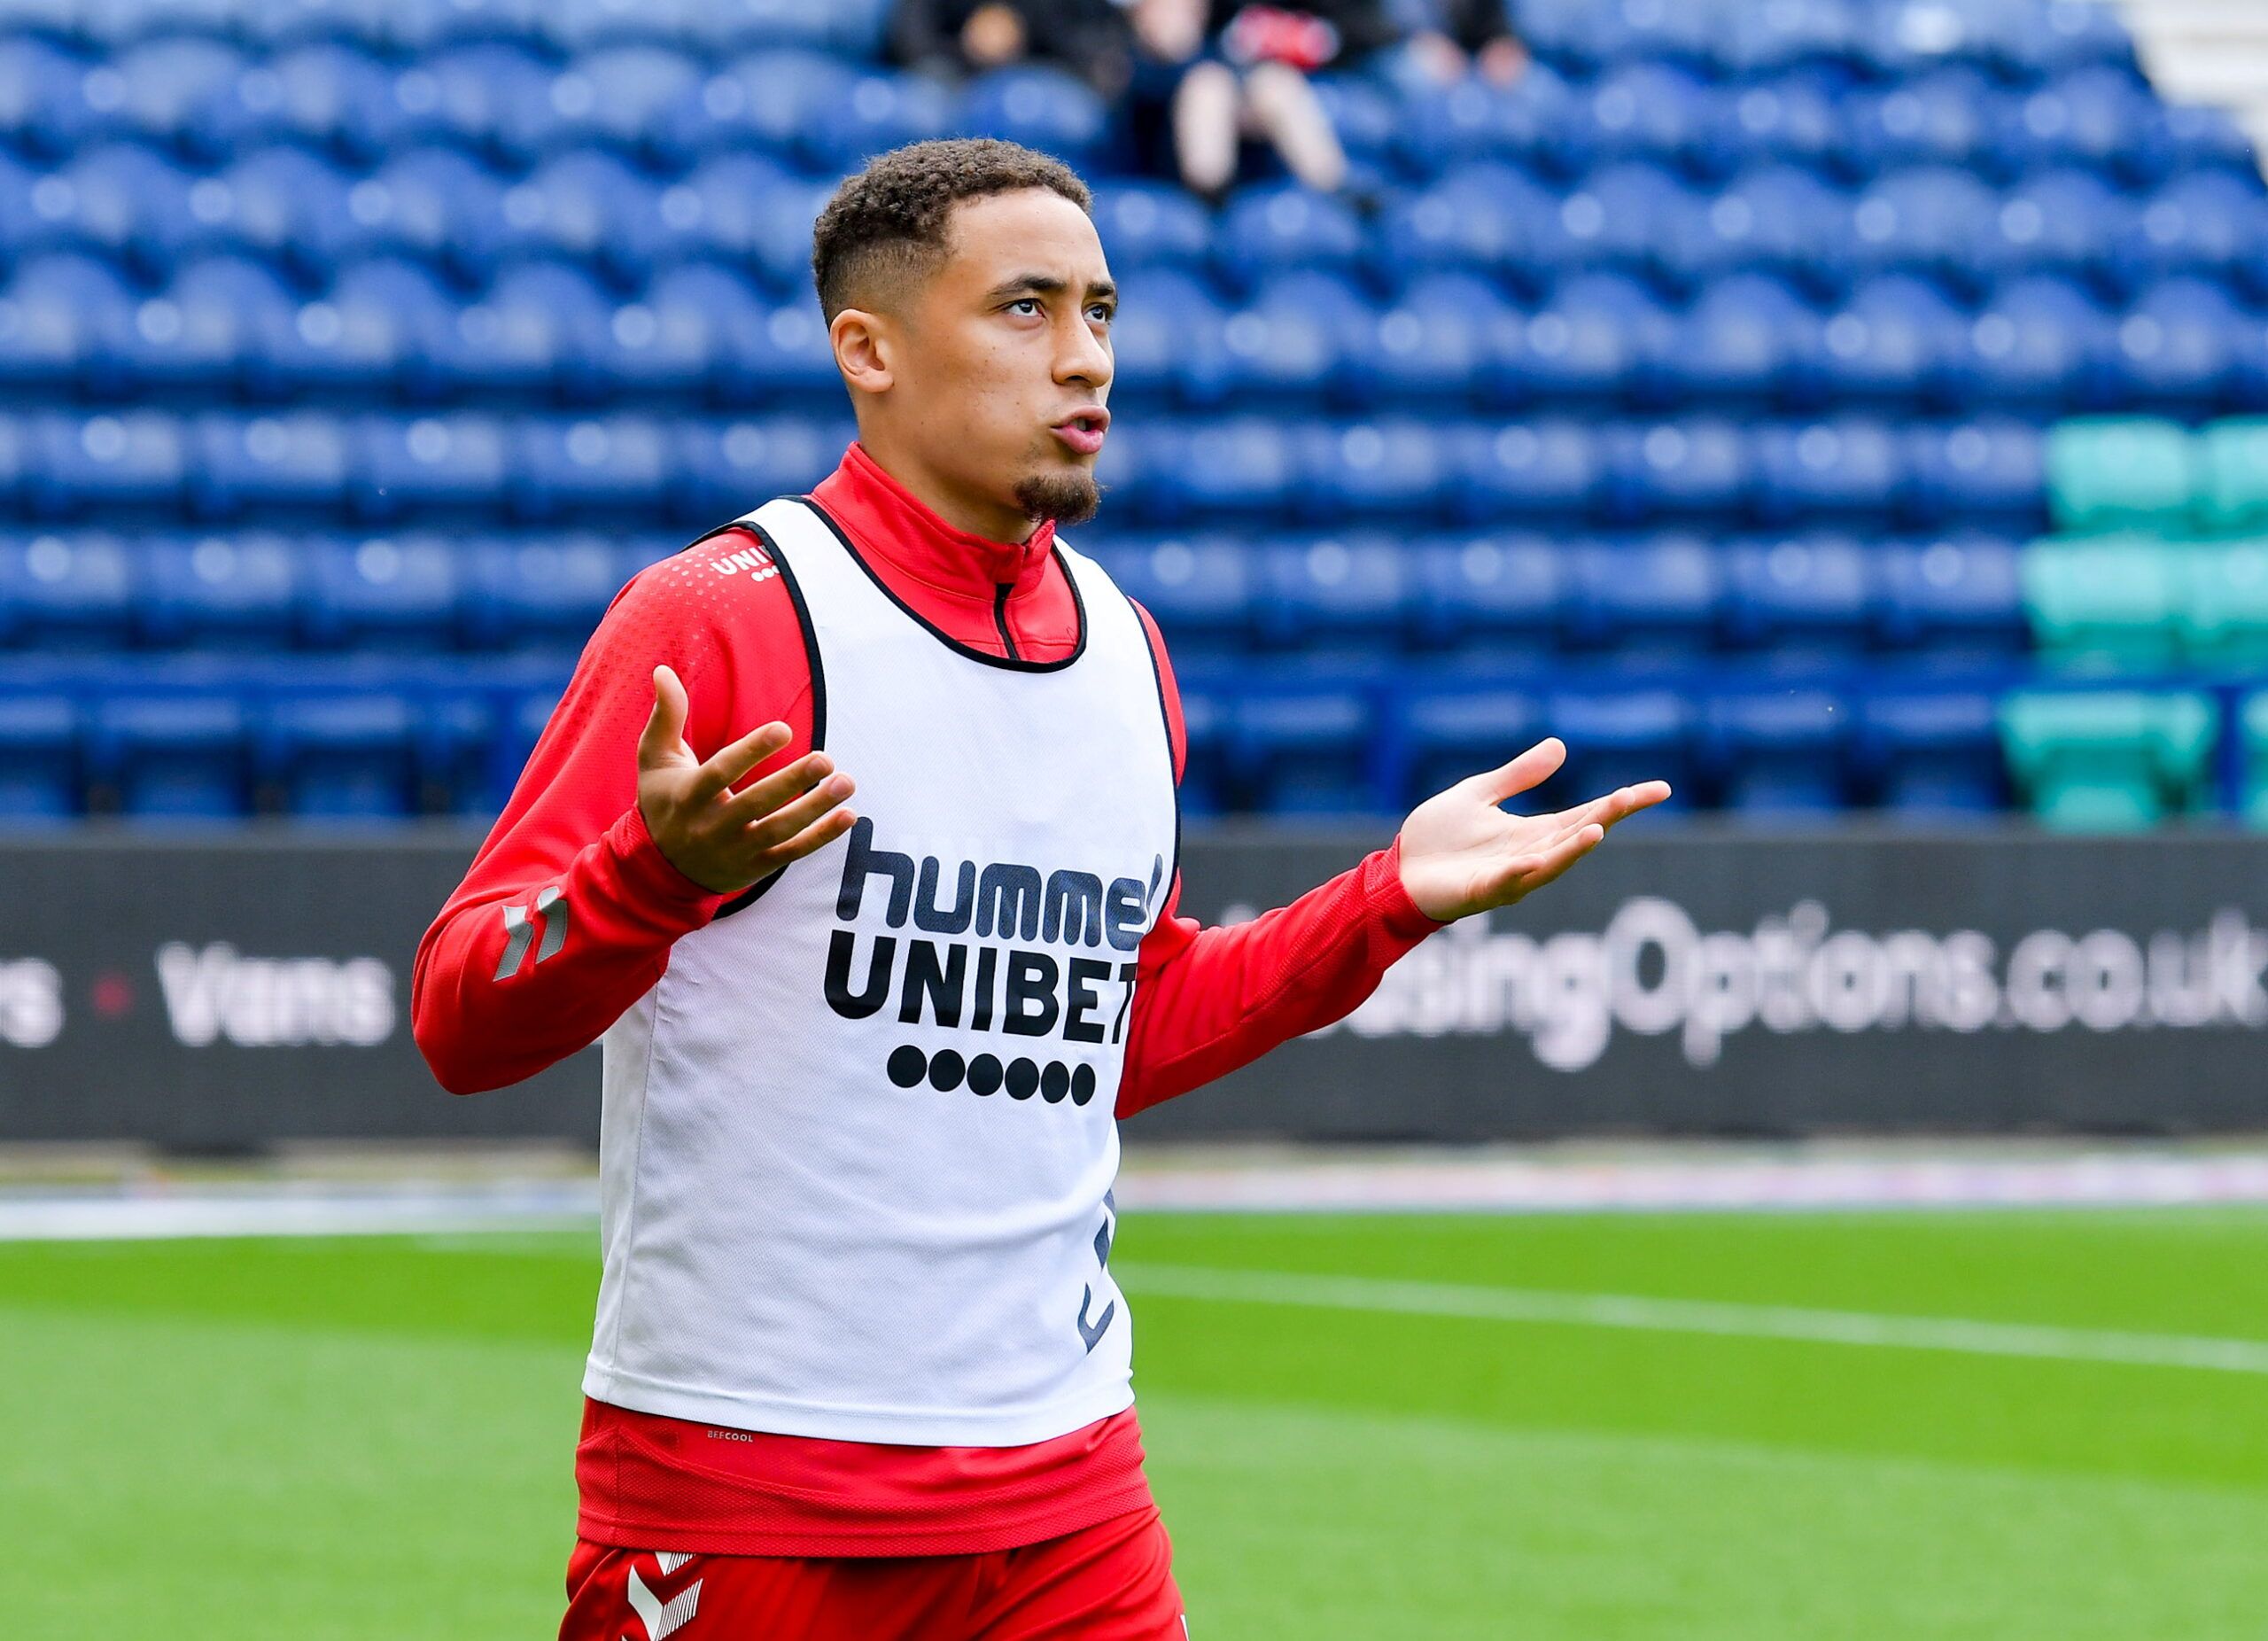 Soccer Football - Championship - Preston North End v Middlesbrough - Deepdale, Preston, Britain - May 7, 2022 Middlesbrough's Marcus Tavernier during the warm up before the match  Action Images/Paul Burrows  EDITORIAL USE ONLY. No use with unauthorized audio, video, data, fixture lists, club/league logos or 